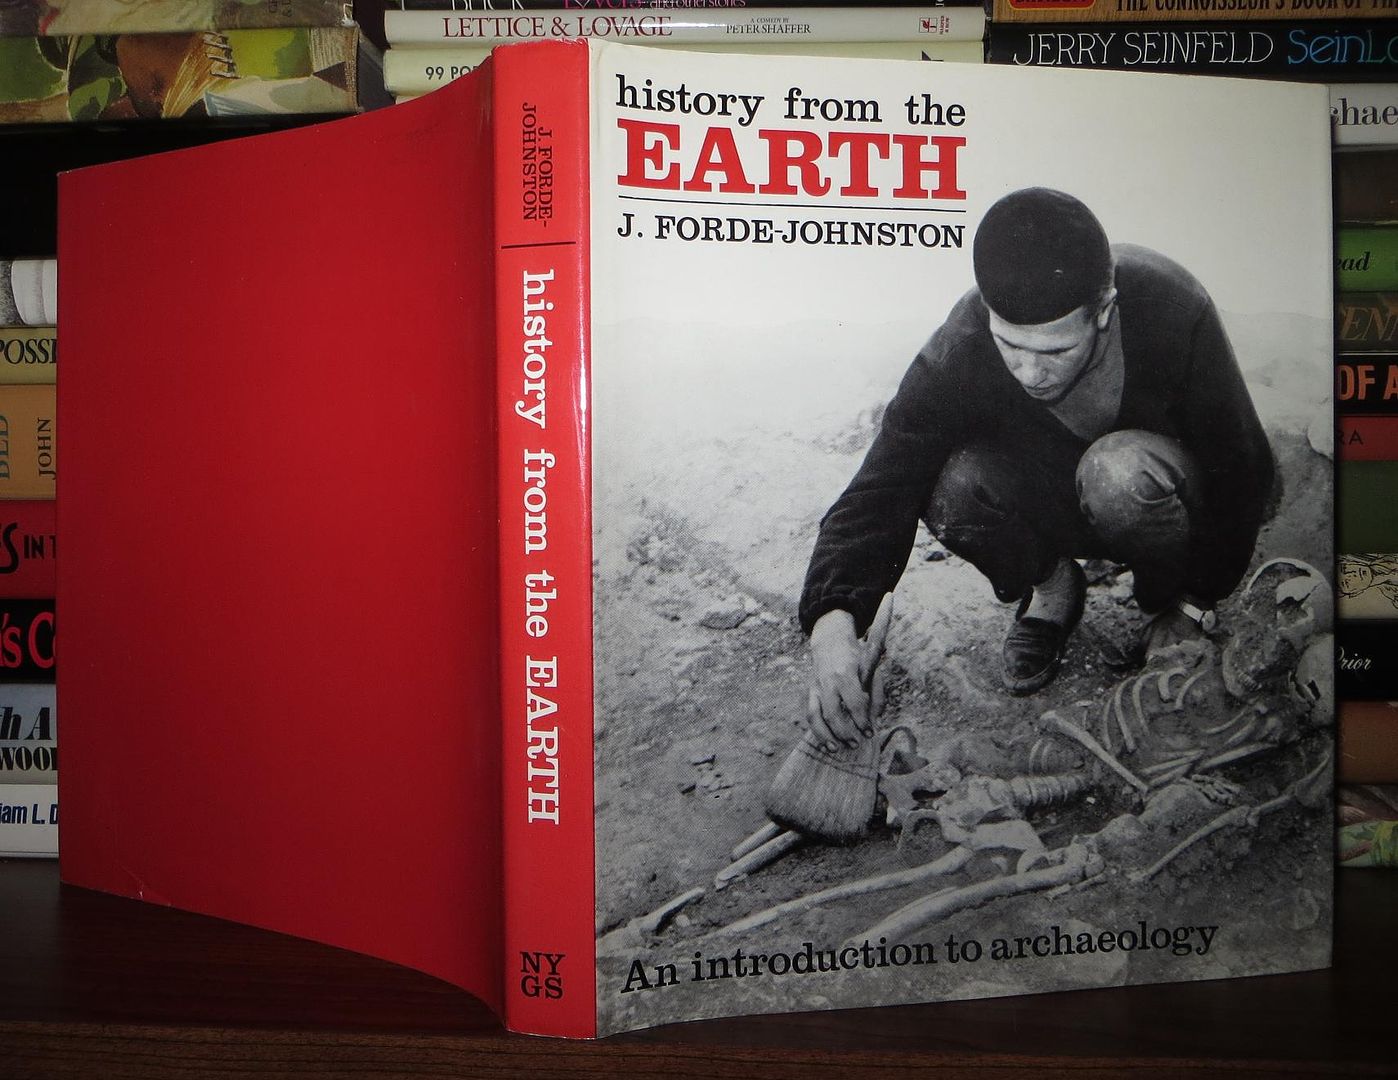 FORDE-JOHNSTON, J. - History from the Earth an Introduction to Archaeology